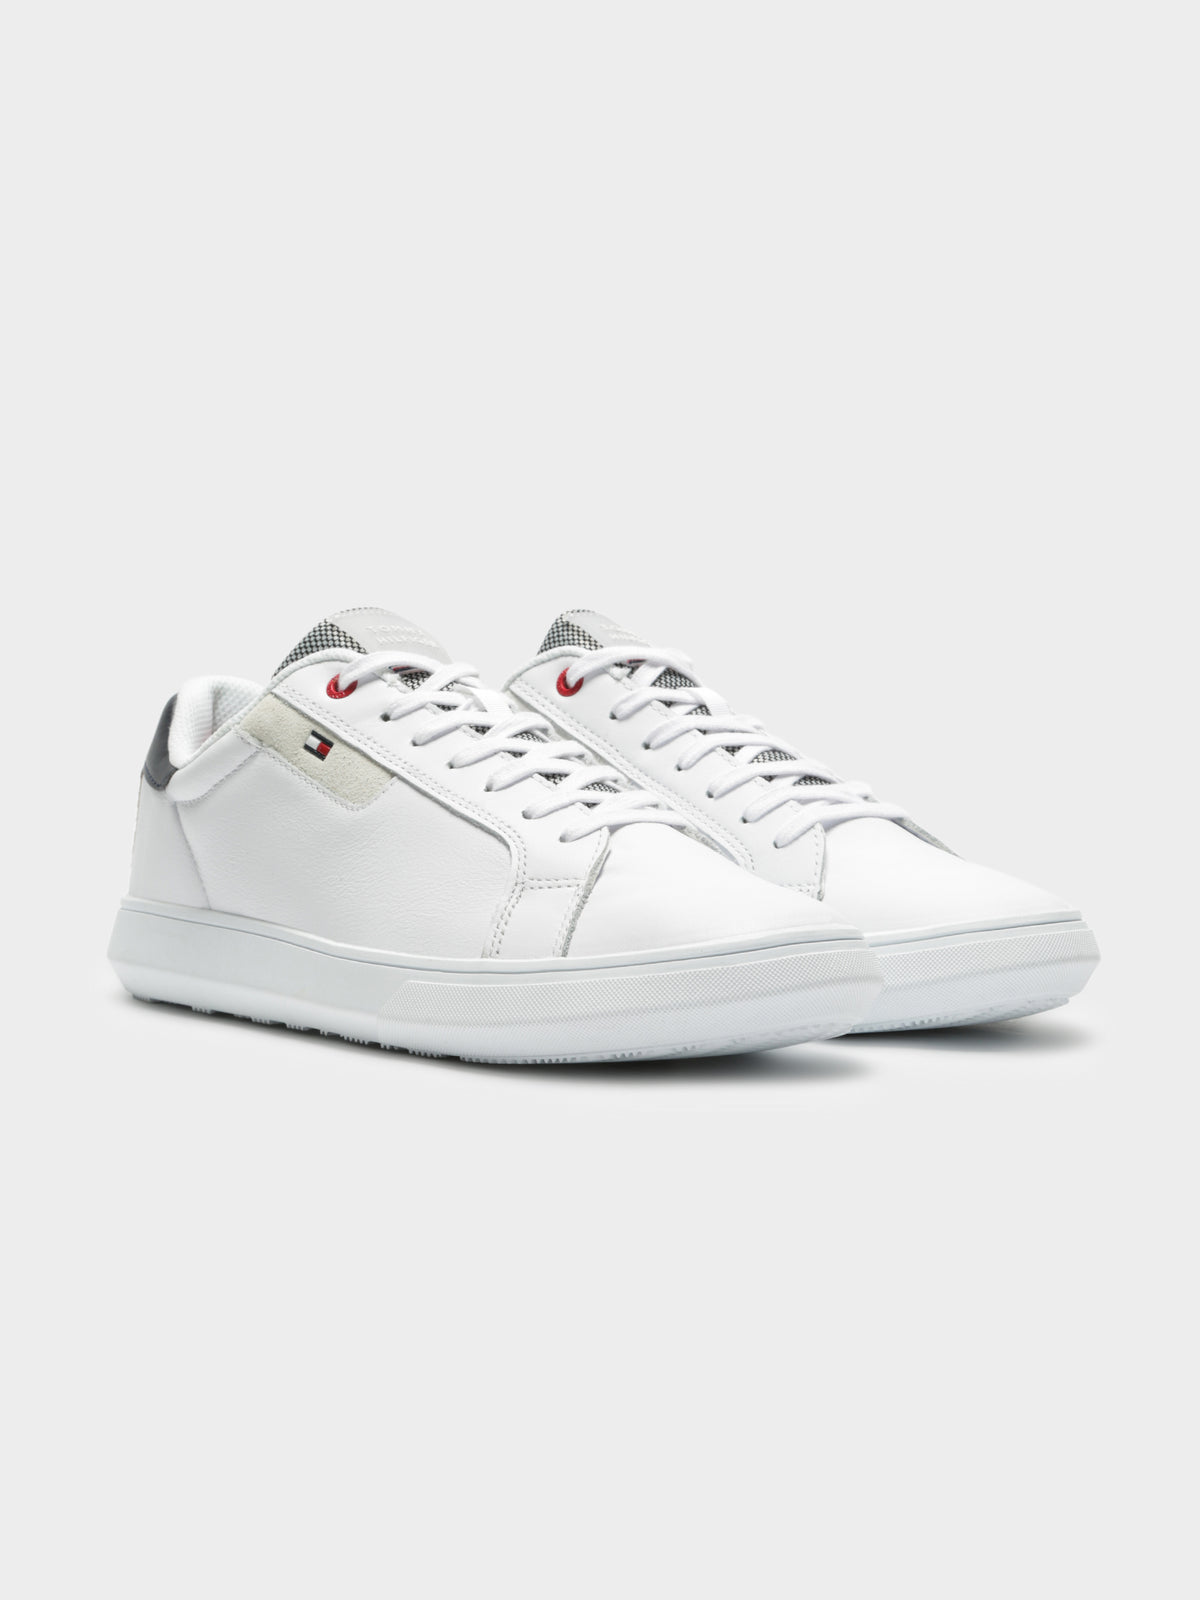 Mens Essential Leather Cupsole Sneakers in White